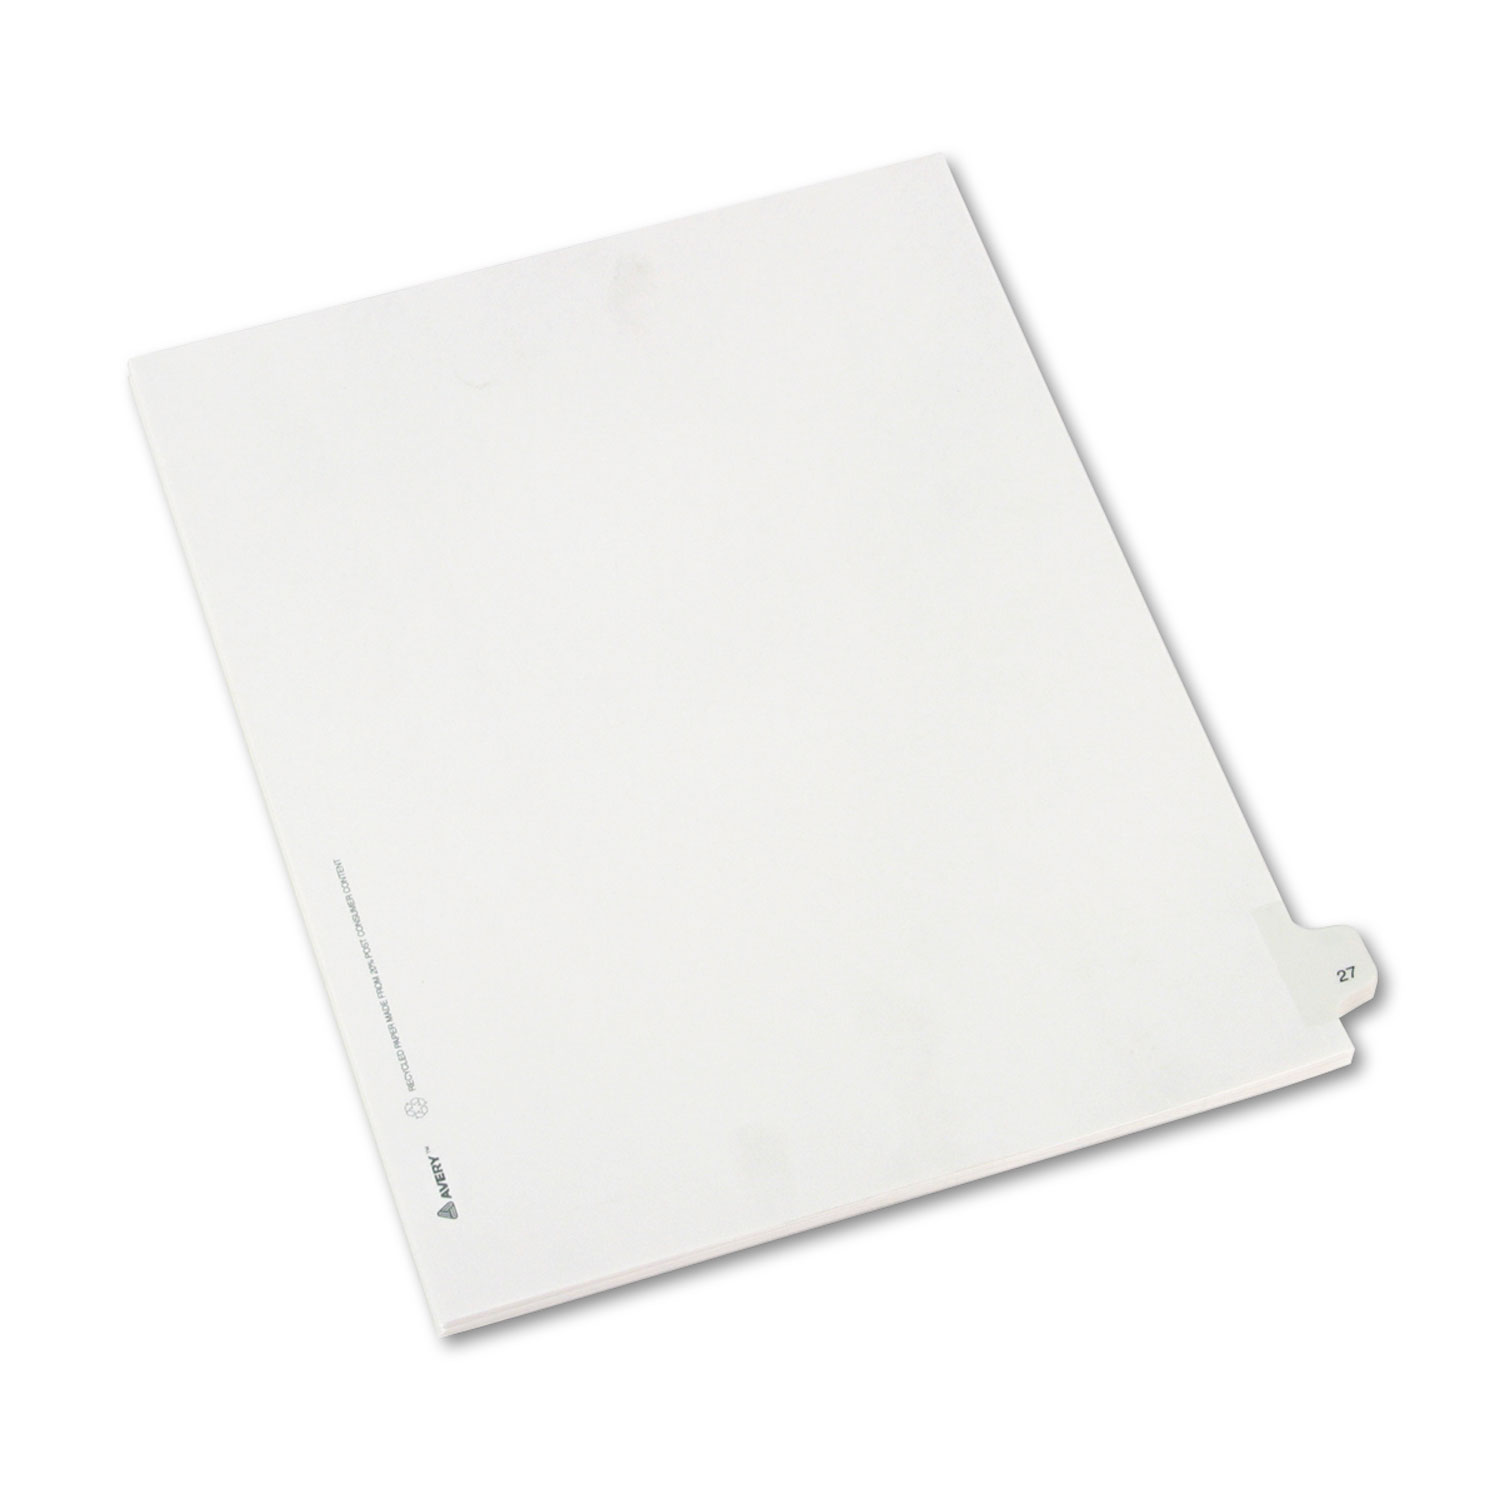 Allstate-Style Legal Exhibit Side Tab Divider, Title: 27, Letter, White, 25/Pack